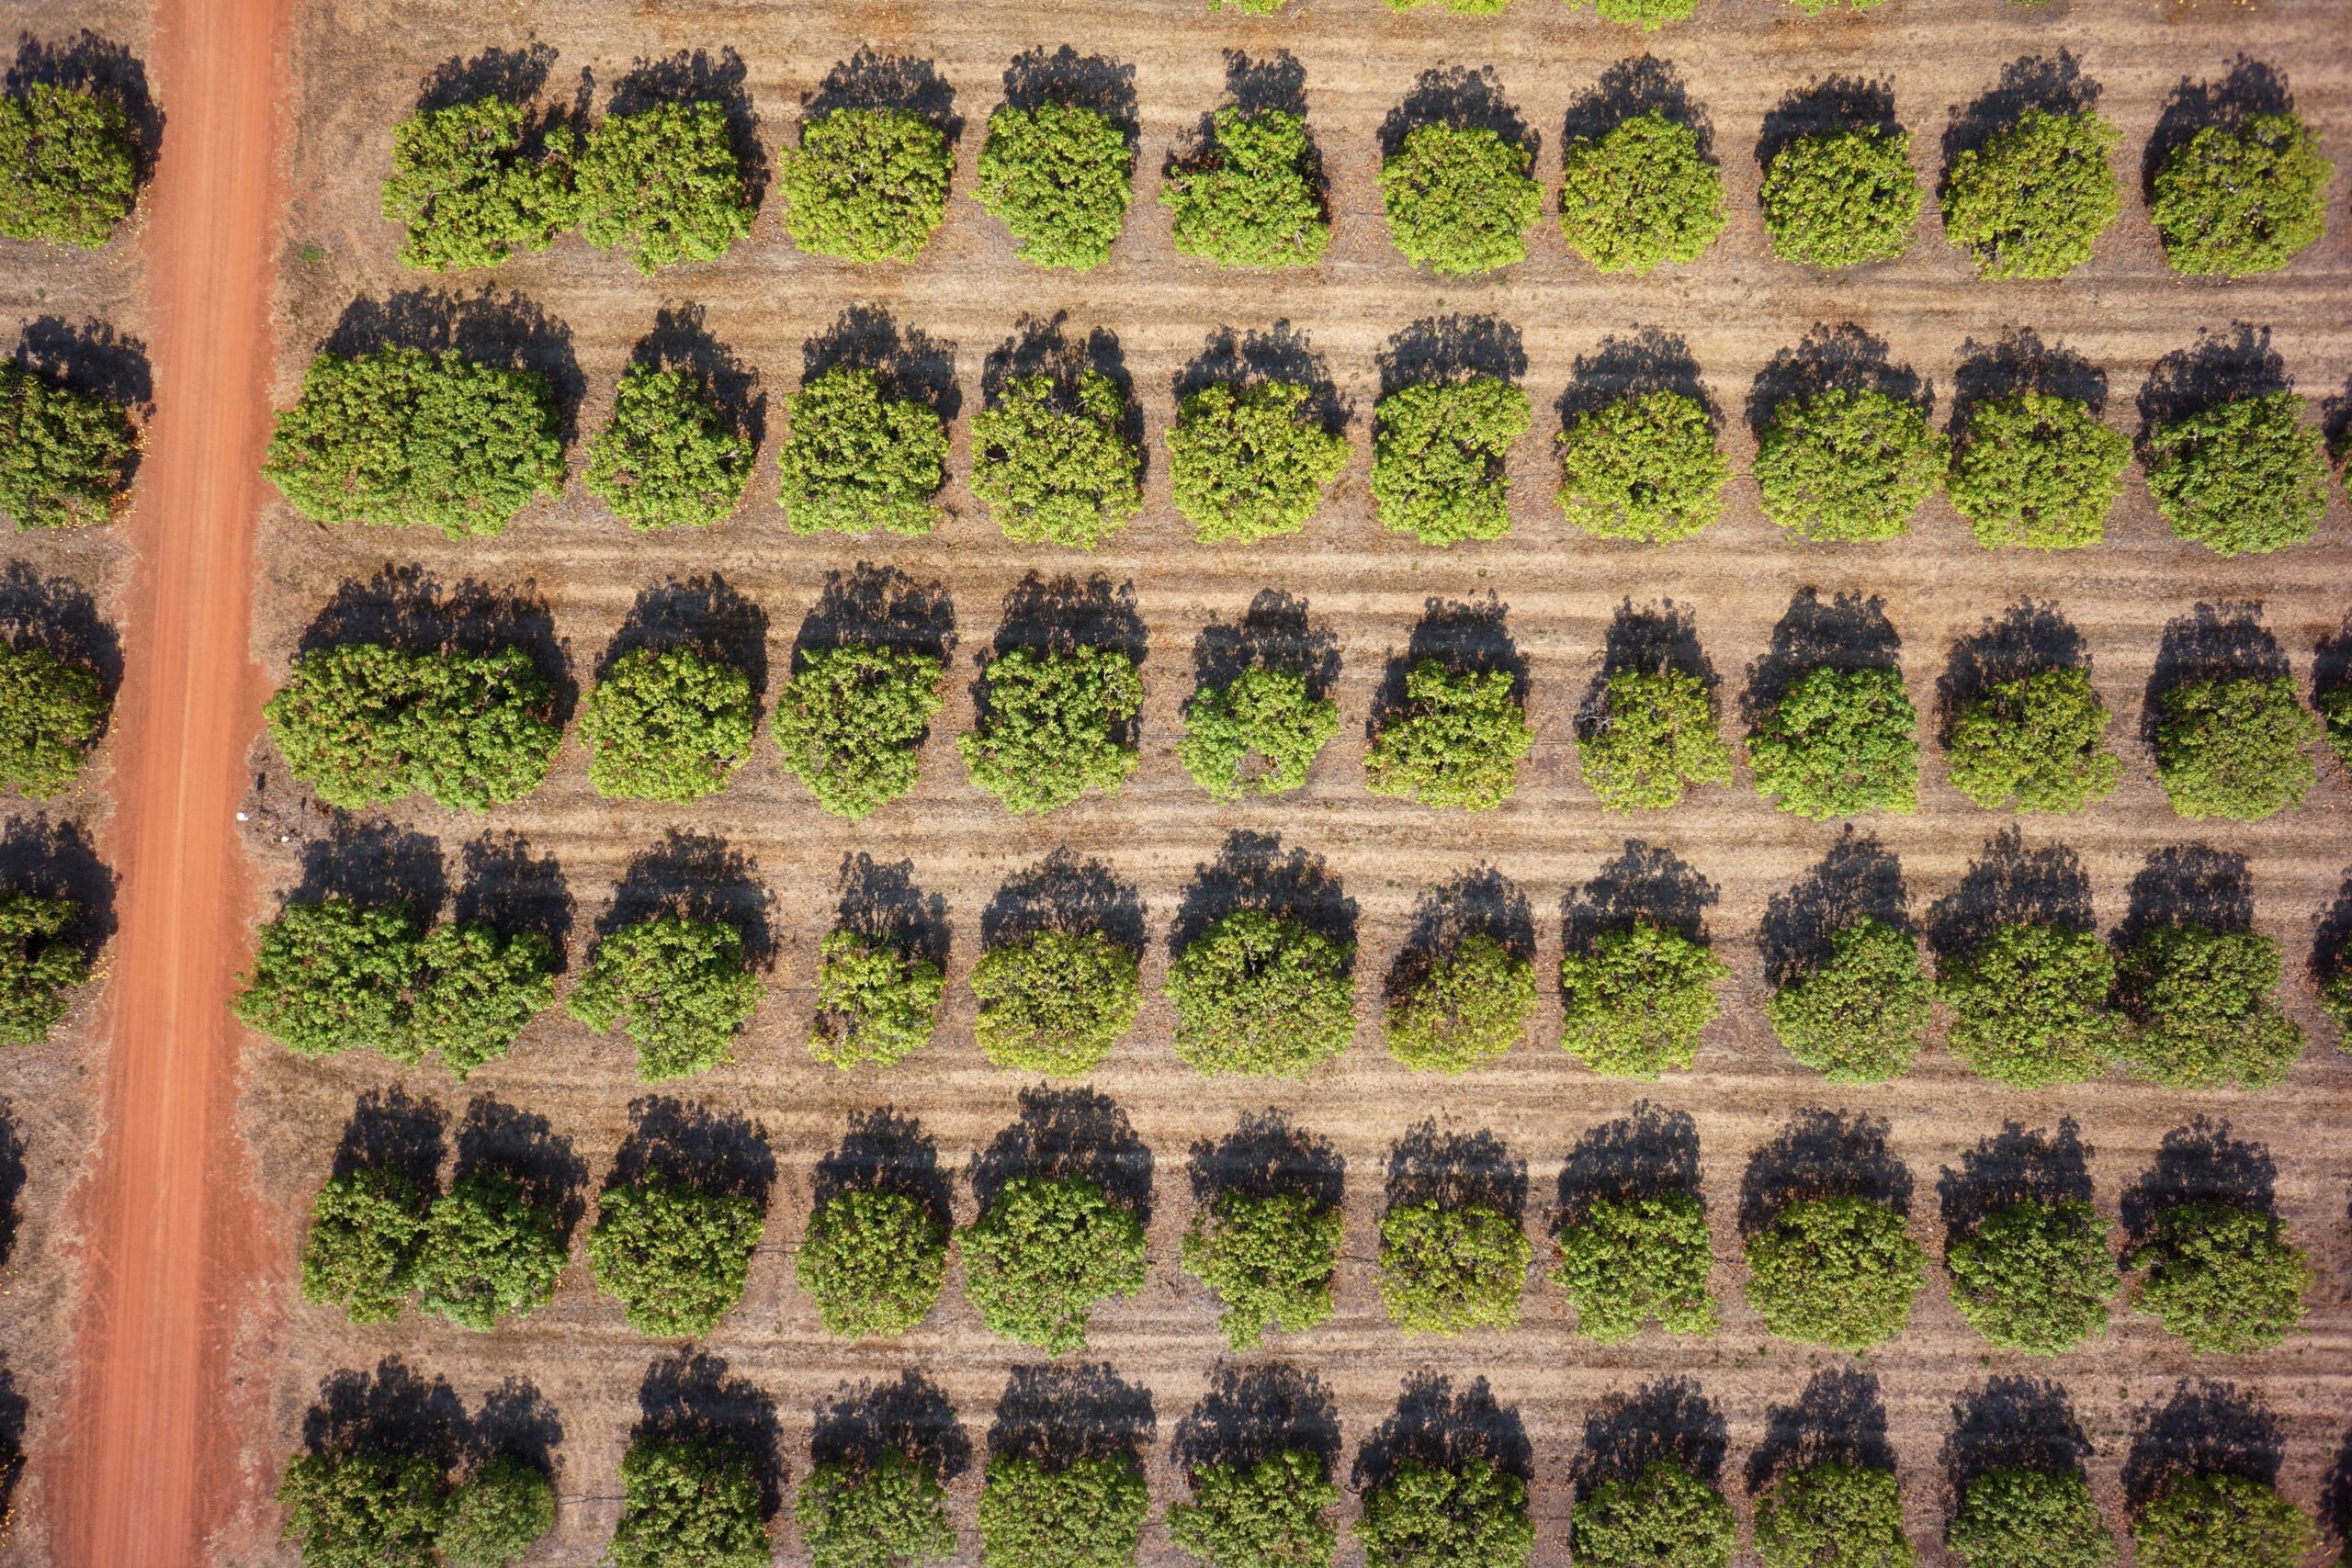 agriculture drone shot